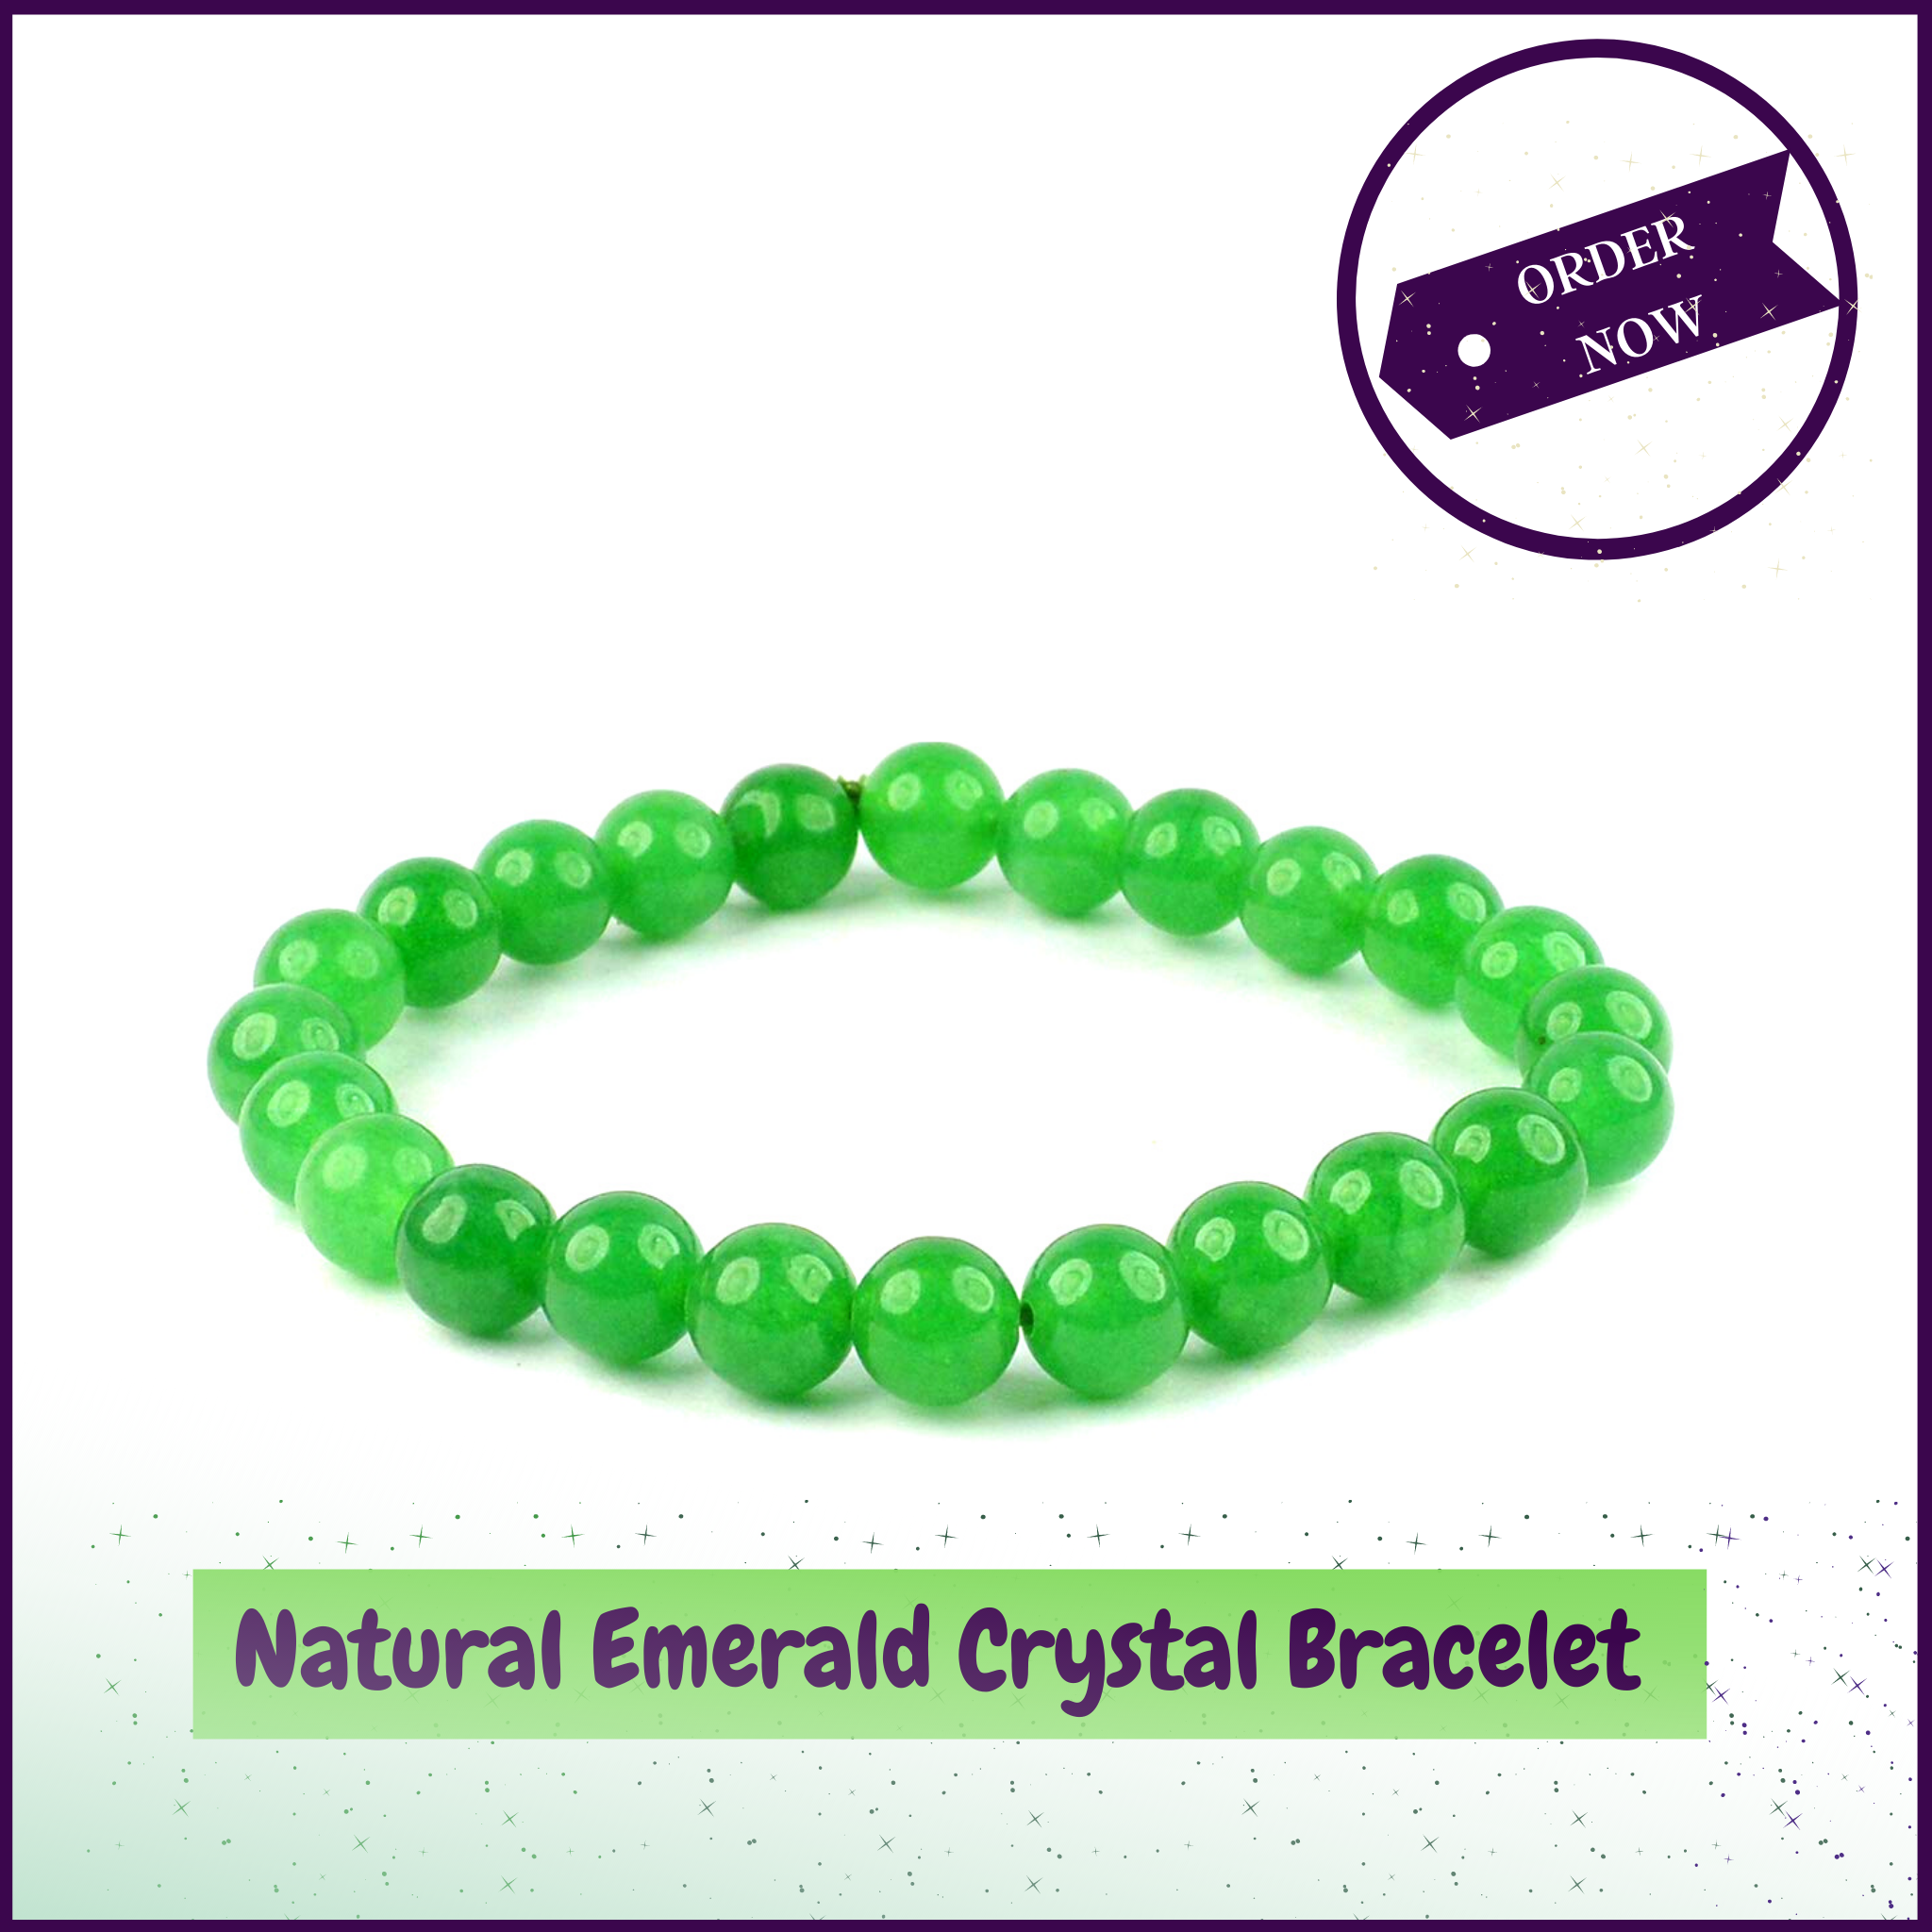 Emerald Bracelet Crystal For Enhancing Clairvoyance & Psychic Abilities - 51pyramids